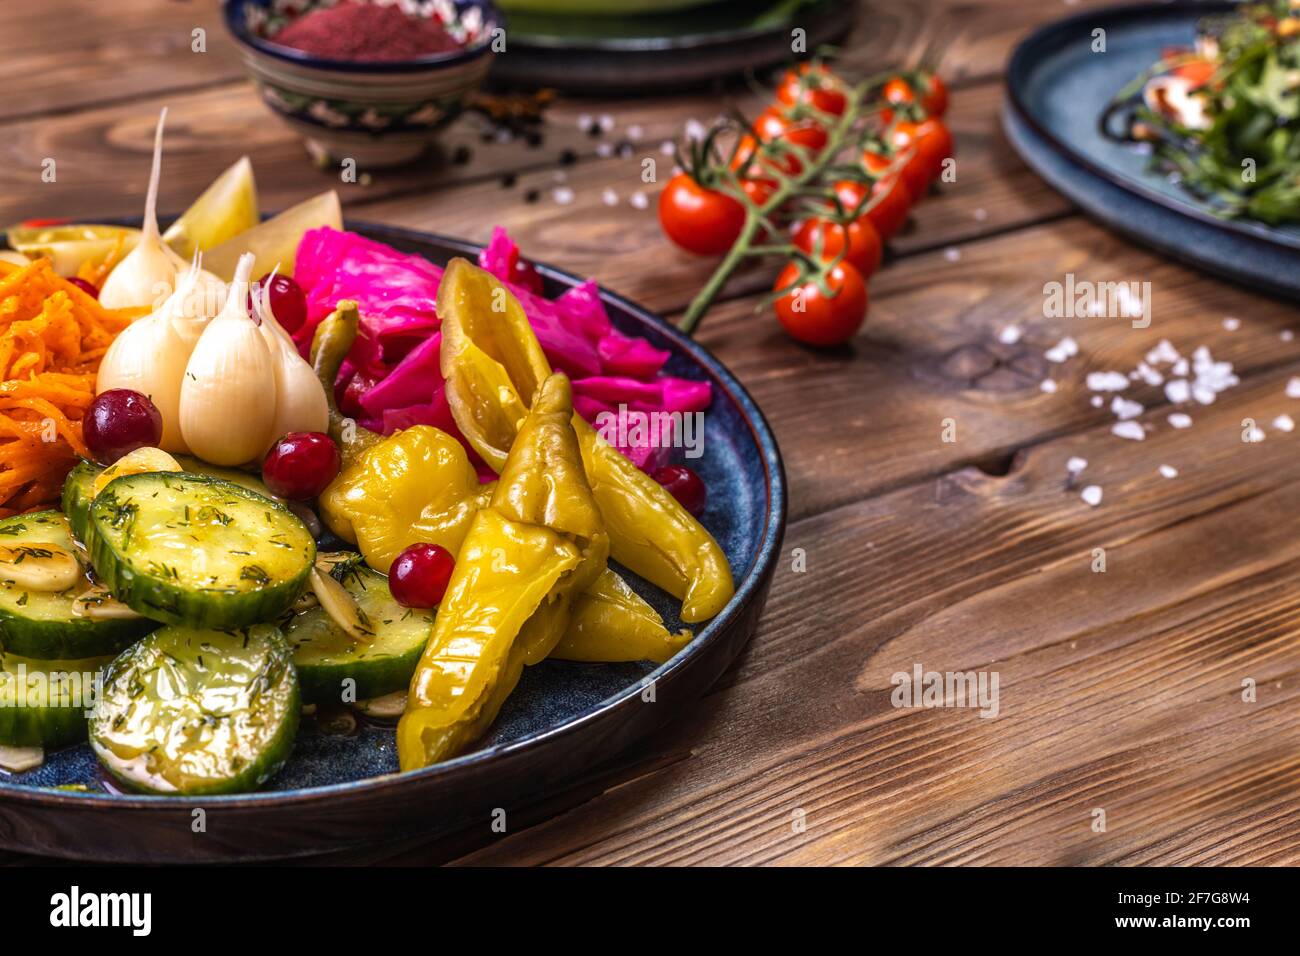 Pickled vegetables: peppers, carrots, garlic, cabbage lie on a platter on a wooden background decorated with chili pepper, rosemary. The concept of he Stock Photo